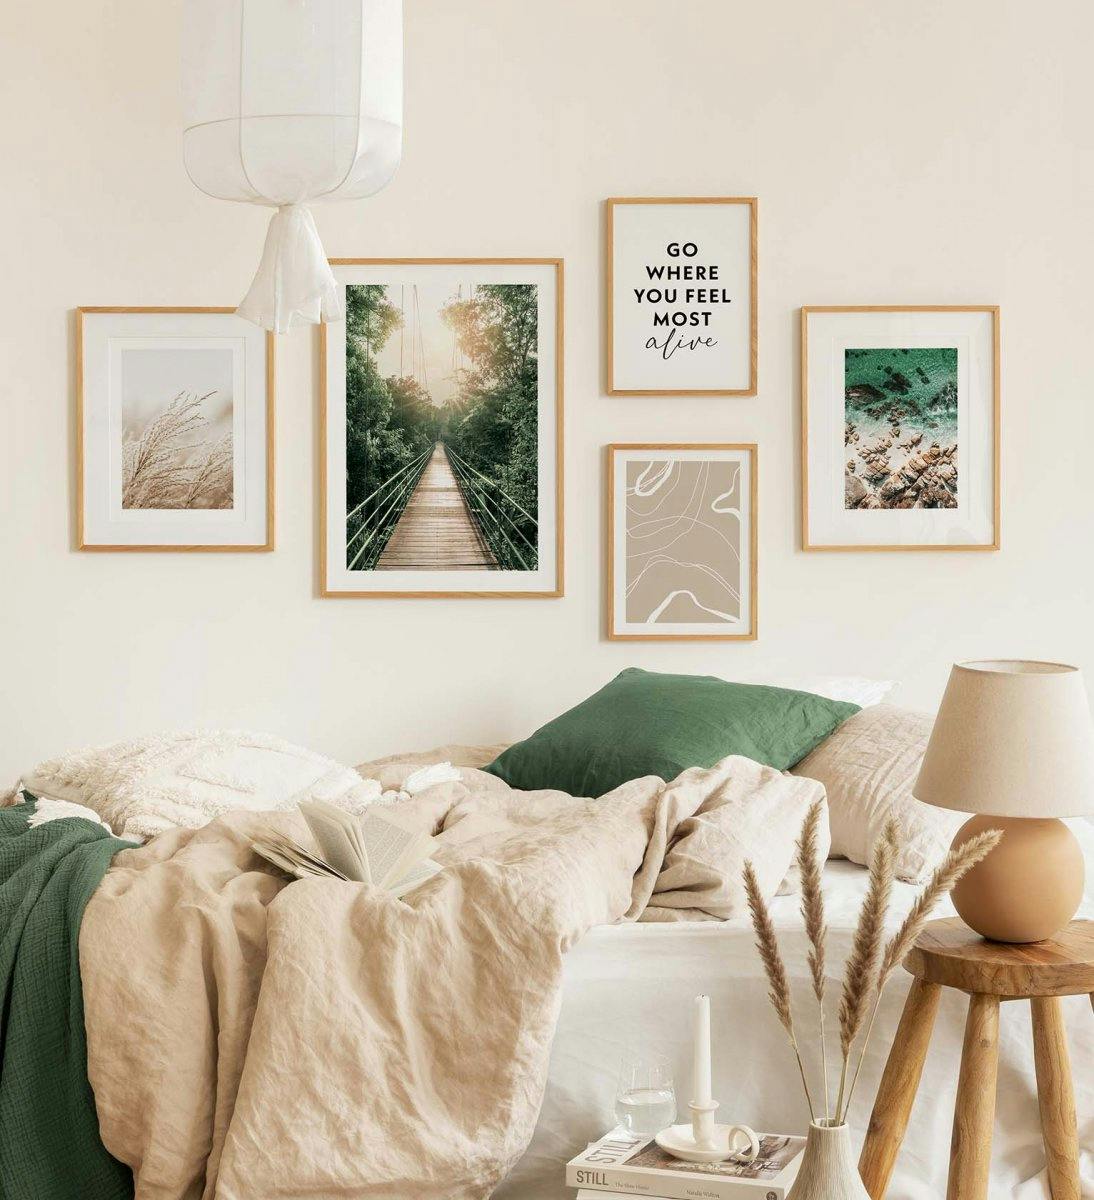 Green gallery wall of nature photographs combined with quotes and line art for bedroom